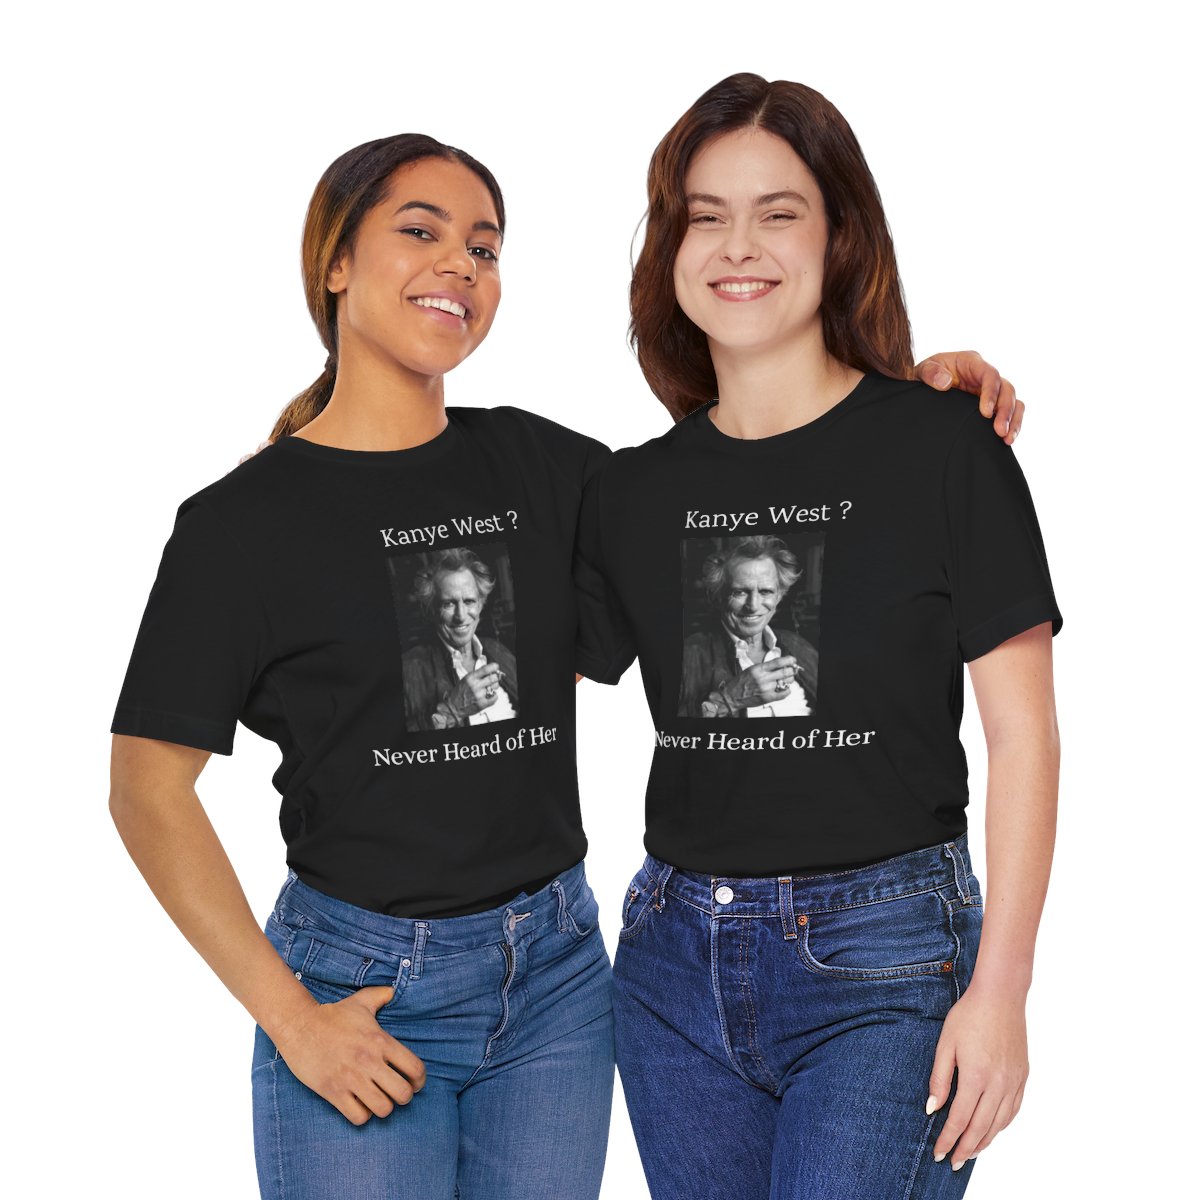 Keith Richards - Kanye West ? Never Heard of Her - T-Shirt product thumbnail image